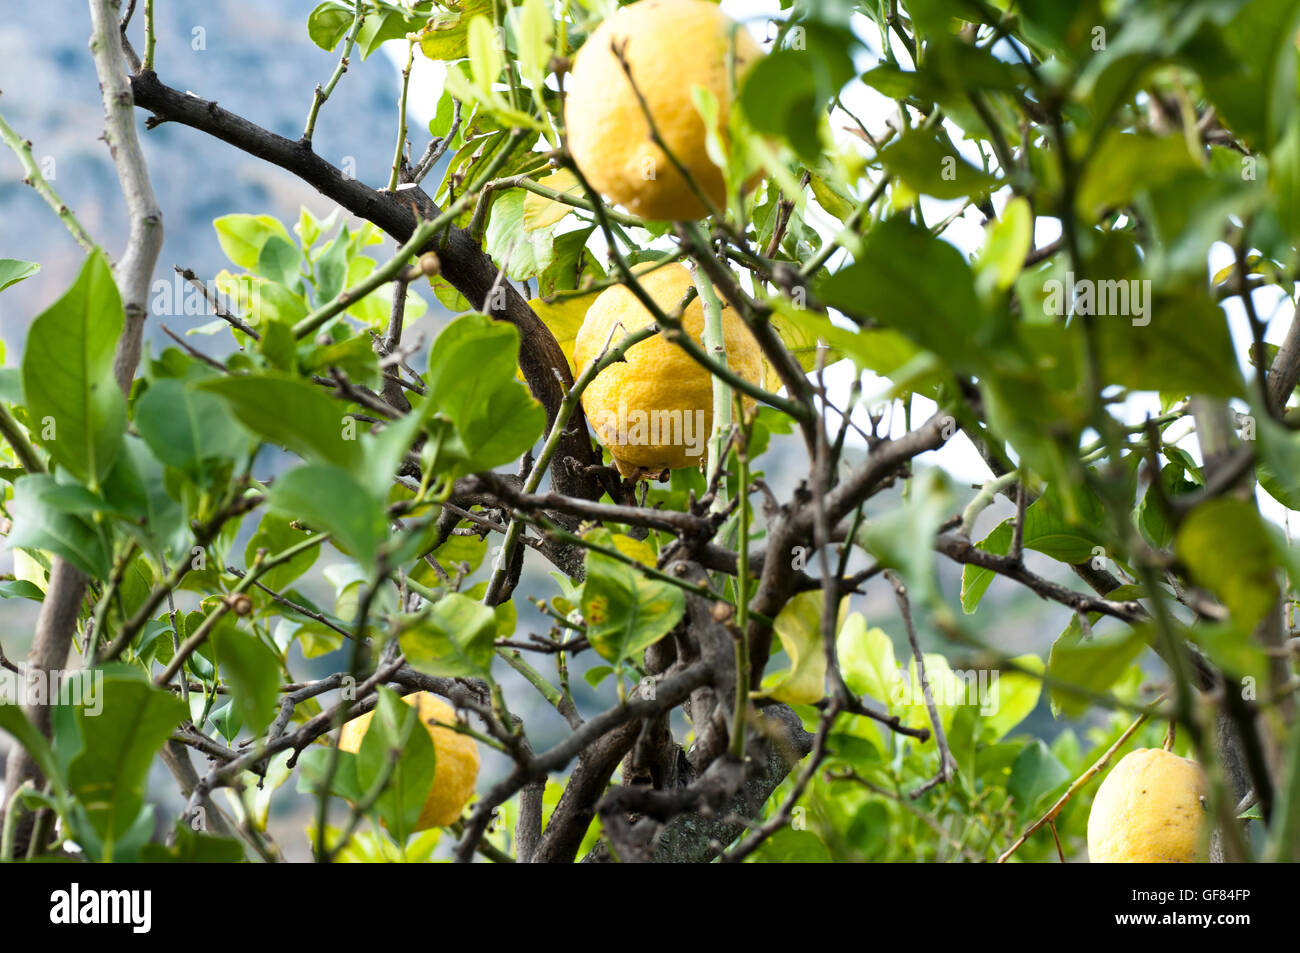 lemons on the branches Stock Photo